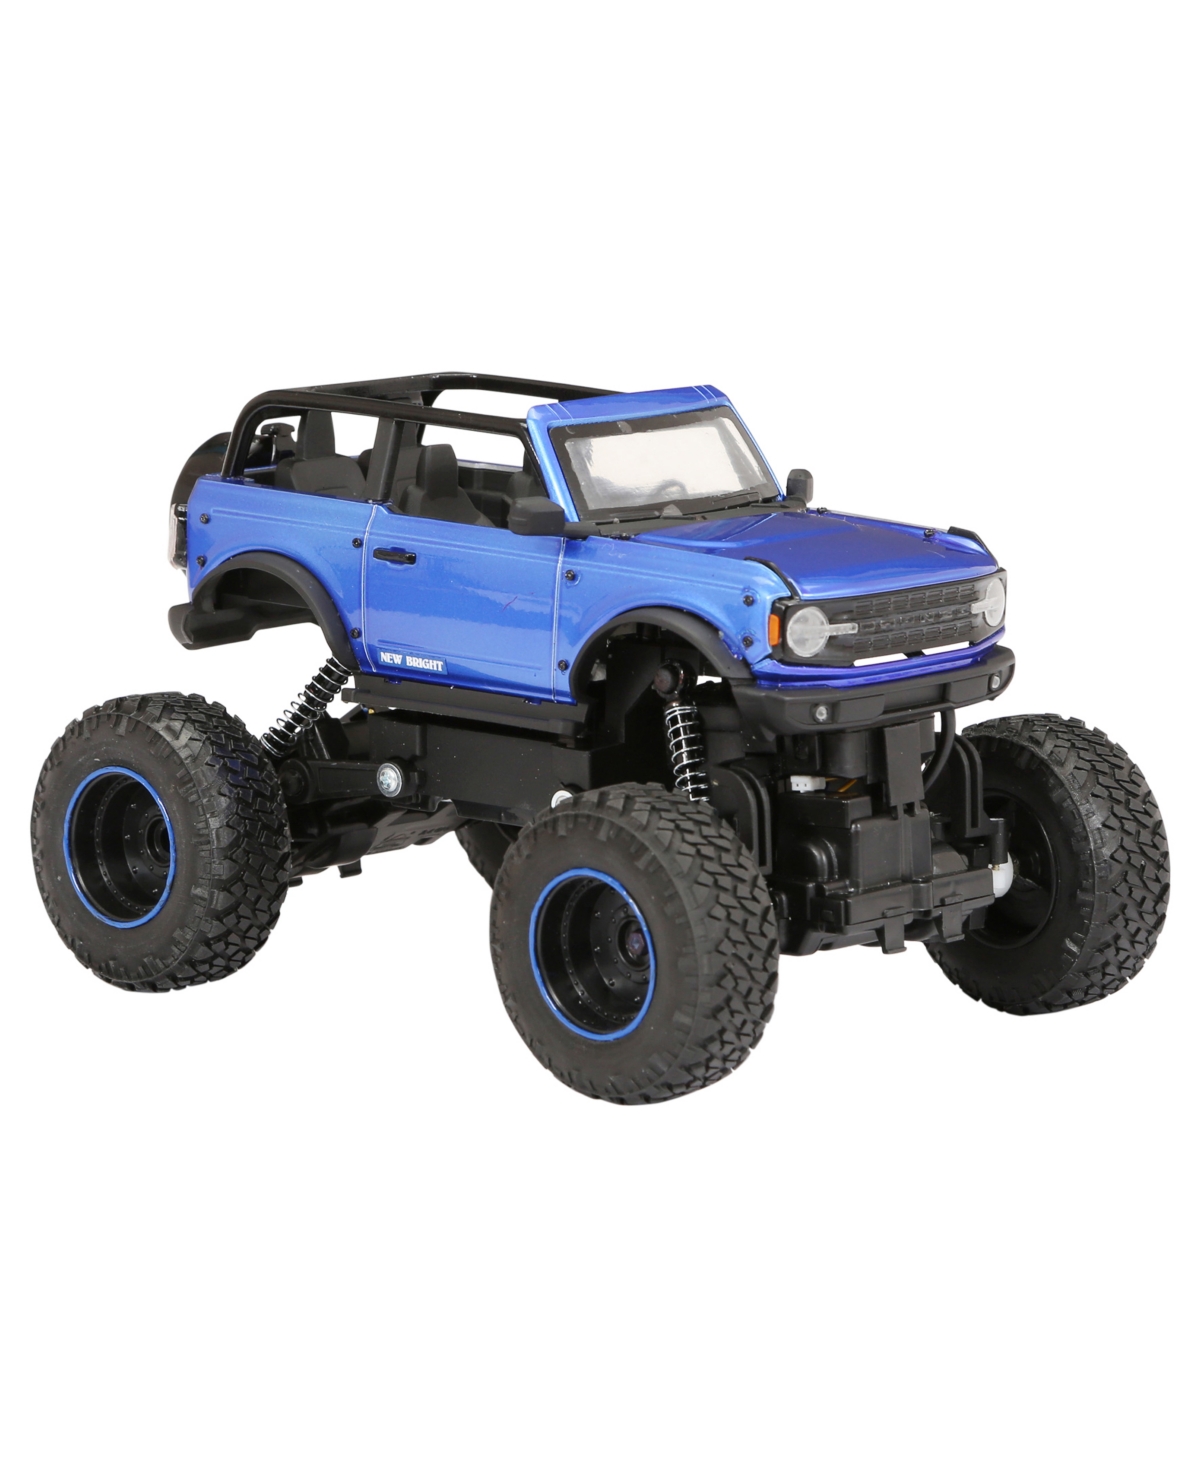 Shop New Bright 1:18 Rc Metal Ford Bronco Truck In Blue